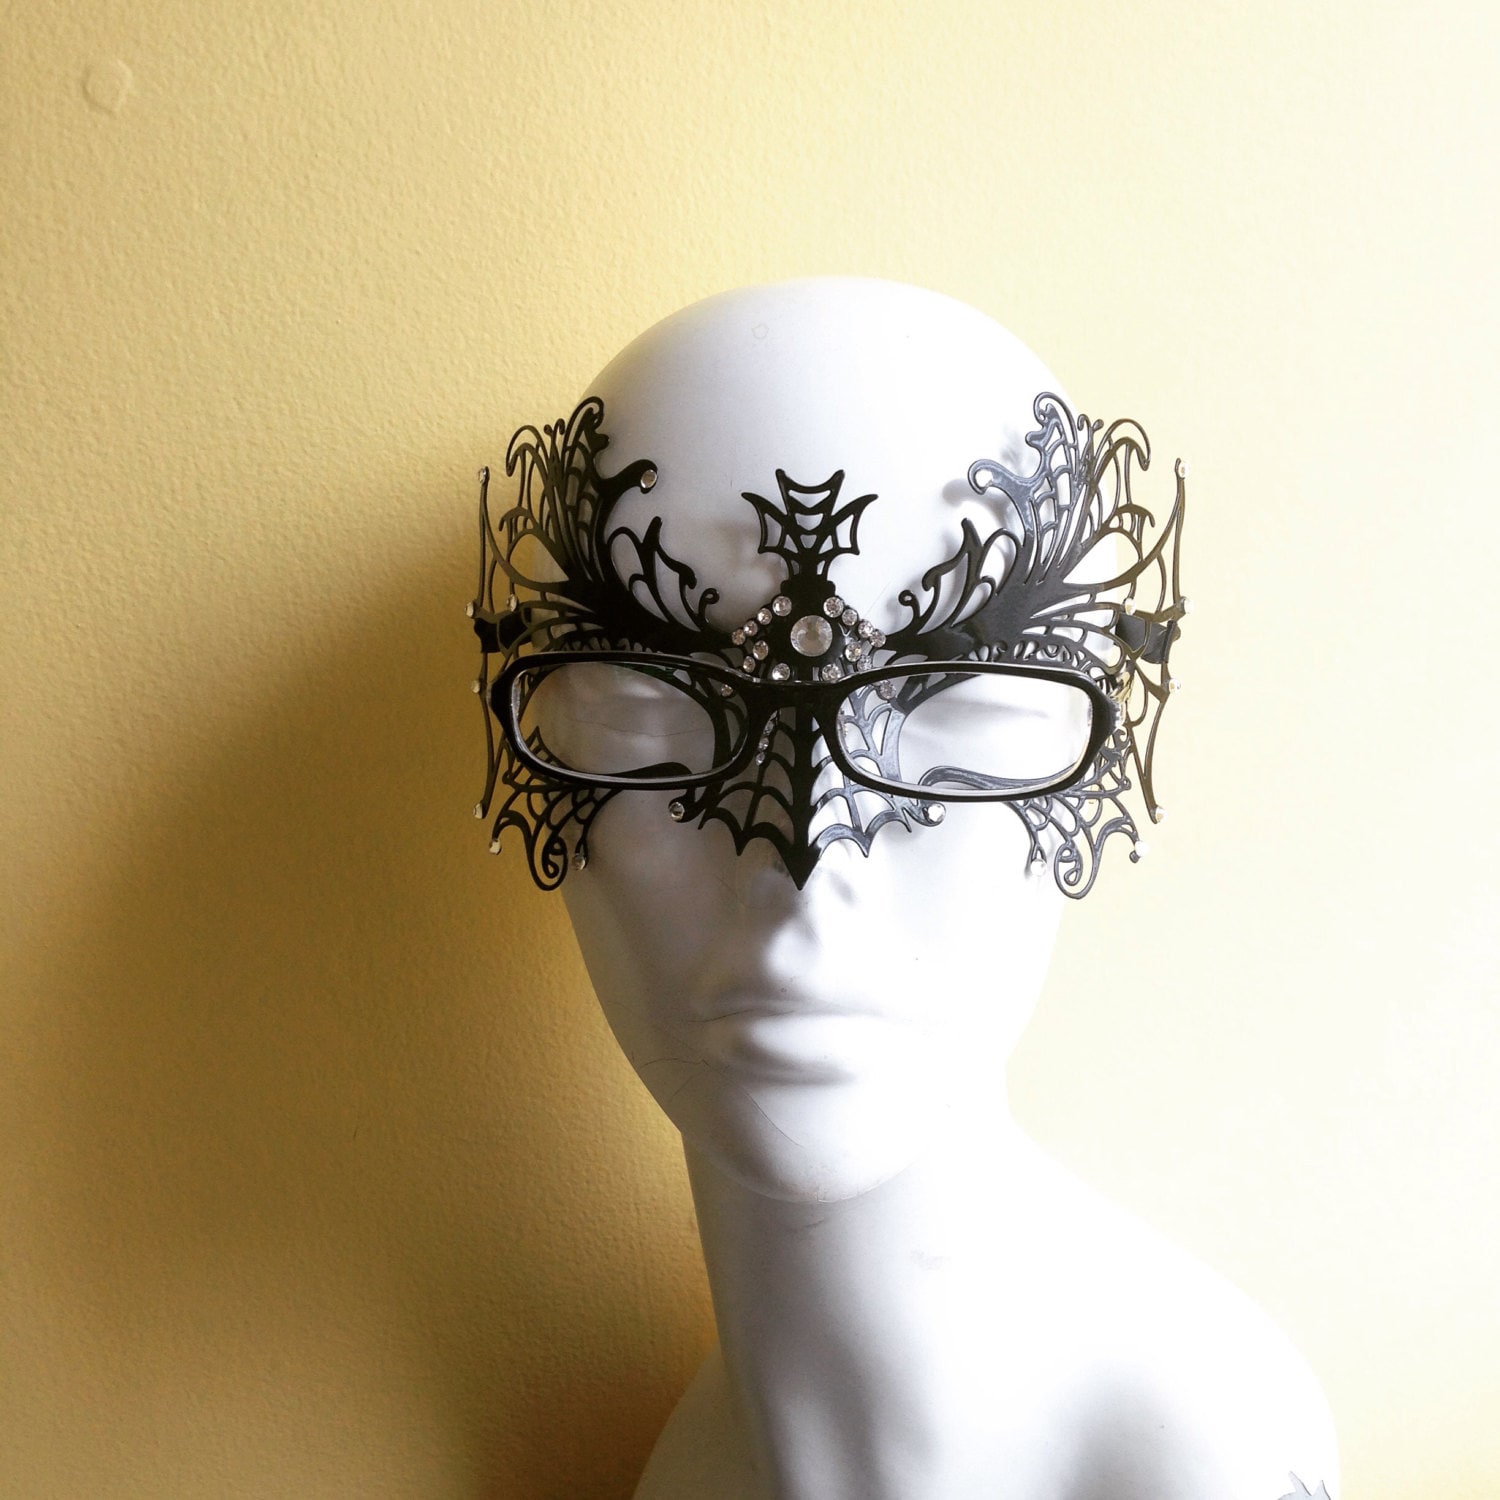 Masquerade Eye Cover Masquerade Party Decorations Lace Velvet Rose Party Half Face Protector Party Blindfold for Party, Adult Unisex, Size: 5.51 x